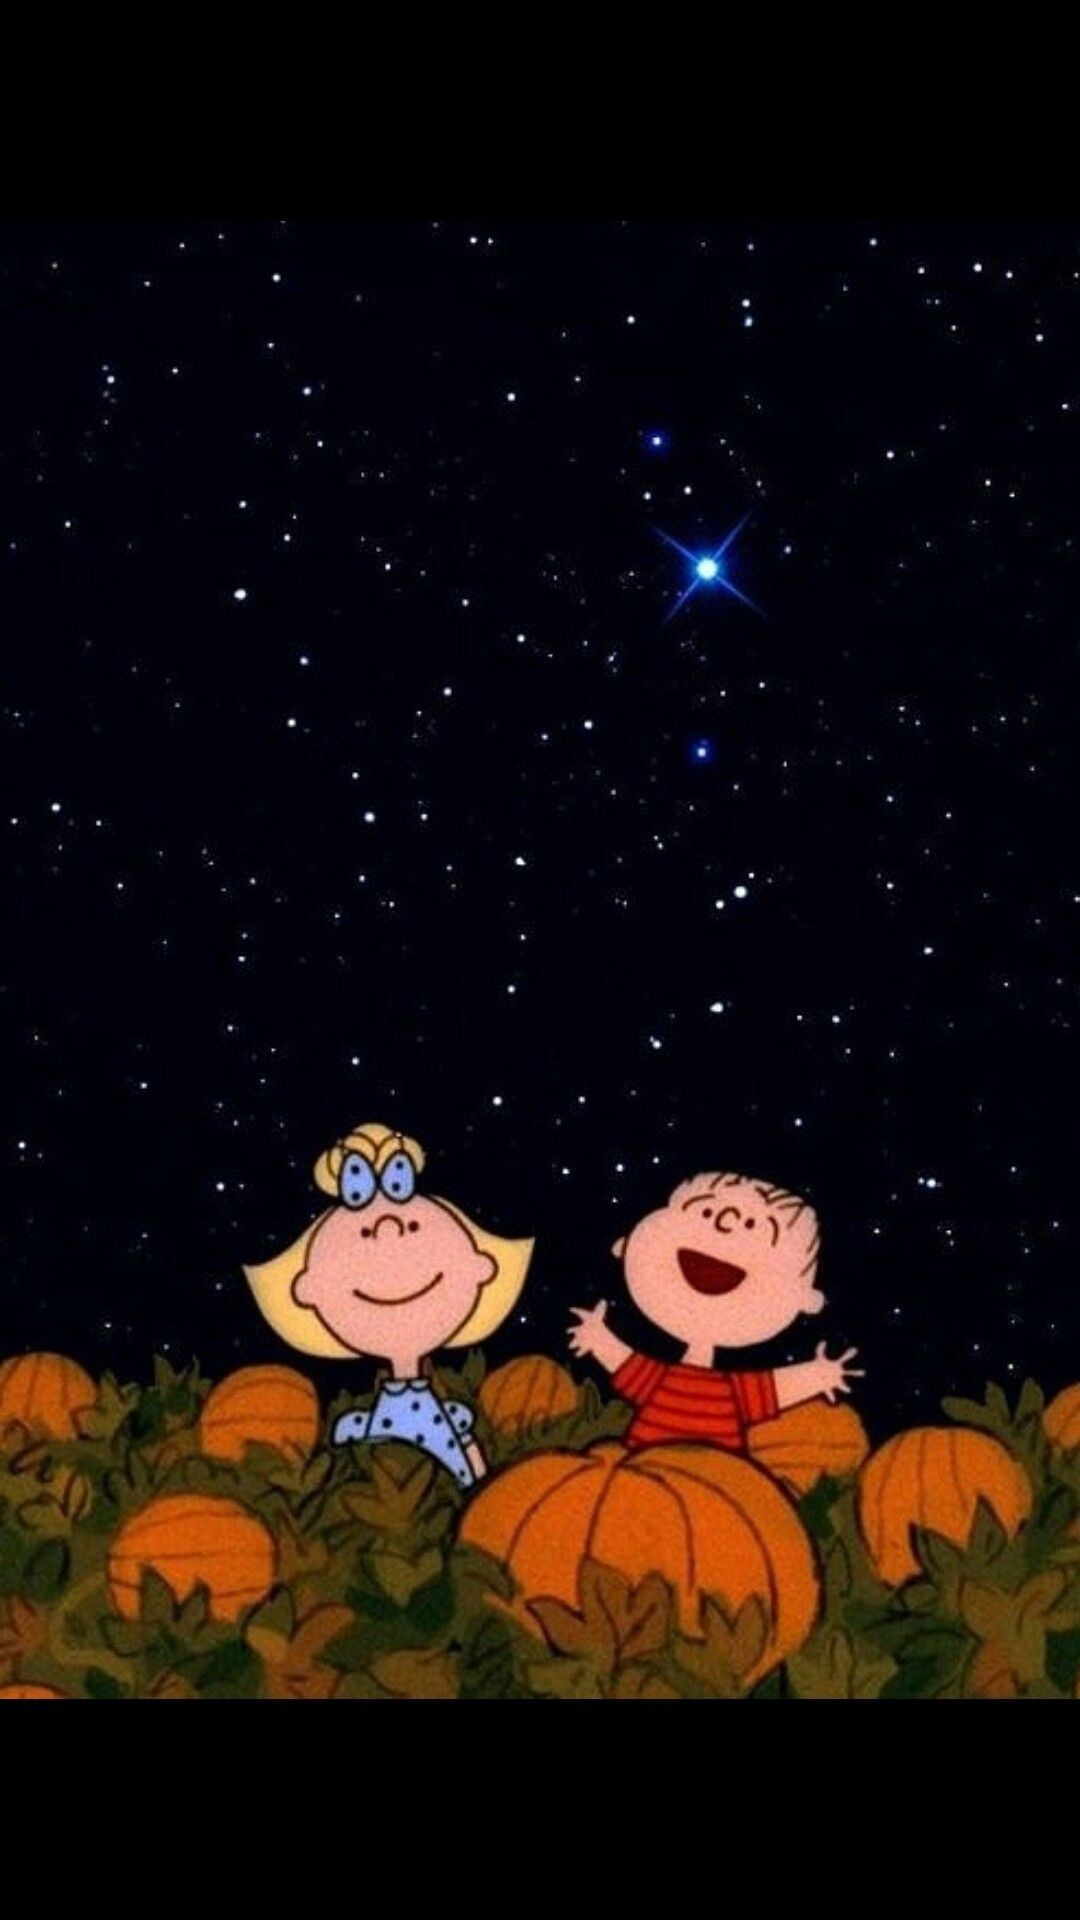 1080x1920  Wallpaper Backgrounds, Phone Wallpapers, Halloween Wallpaper,  Backdrops, Charlie Brown, Background